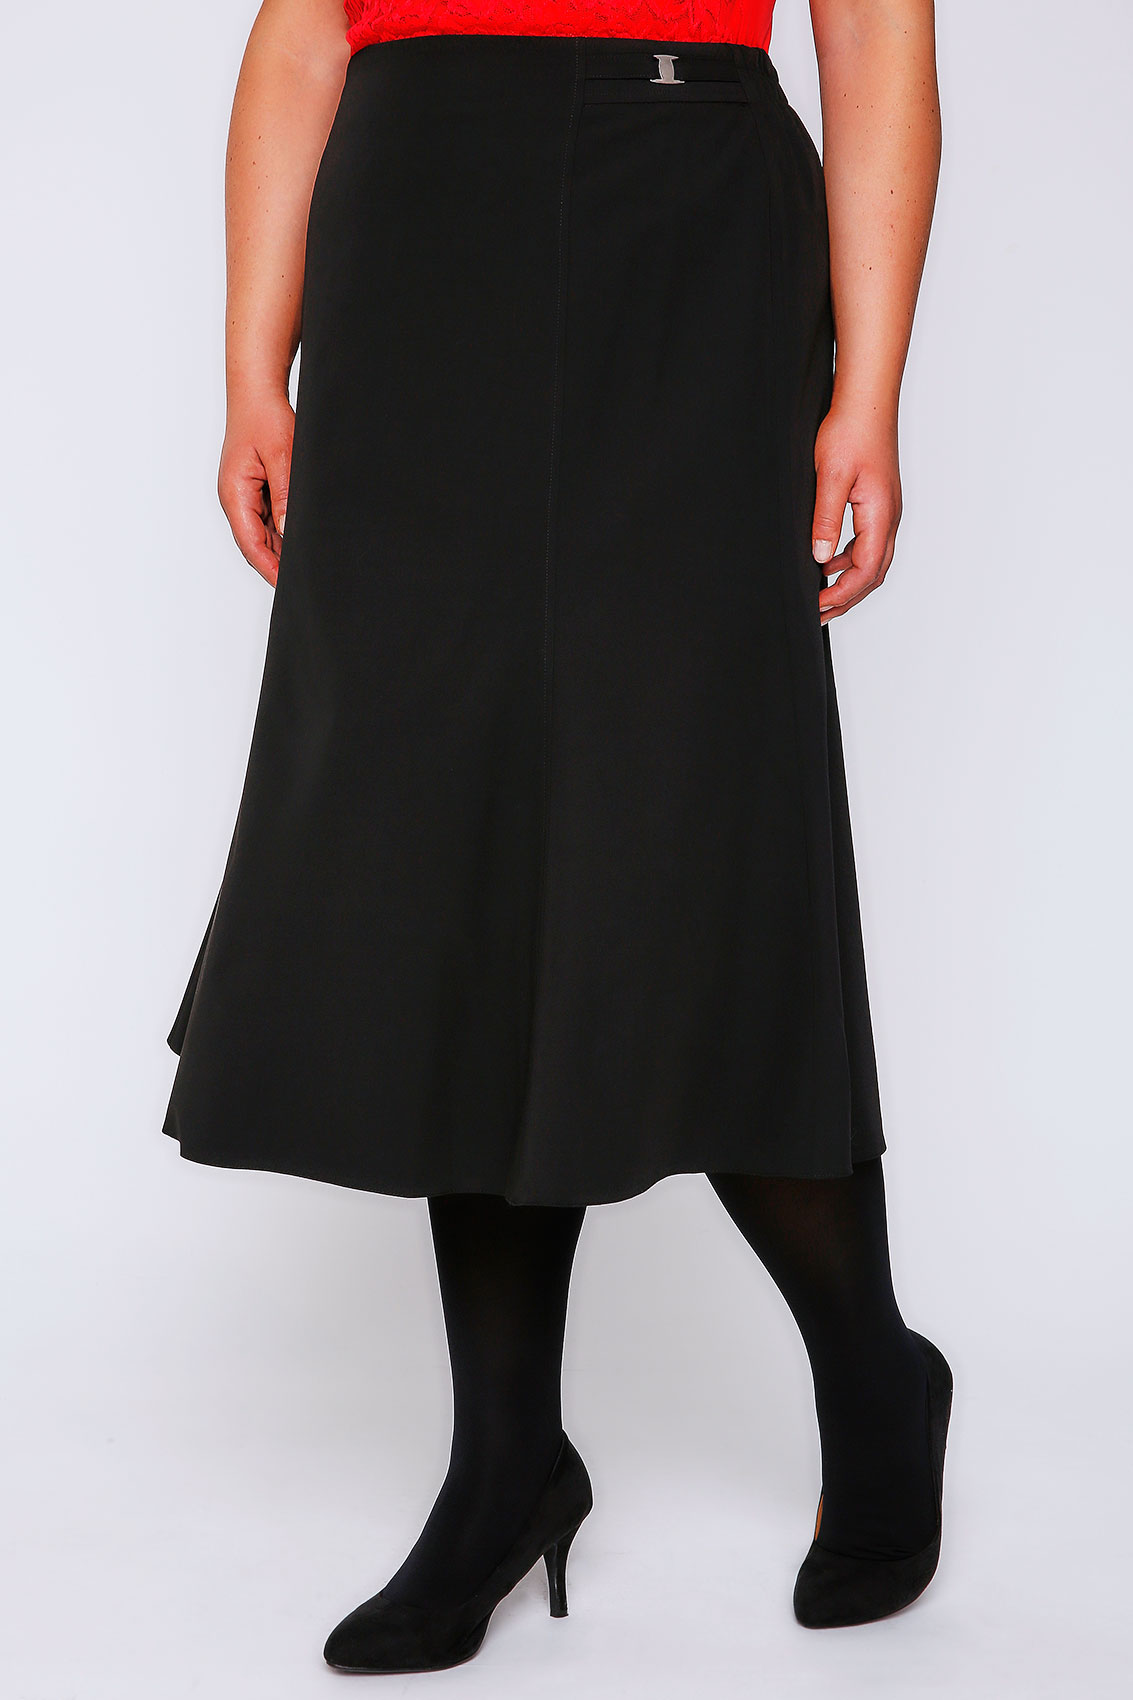 Black Fit & Flare Skirt With Elasticated Waist Plus Size 16 to 32